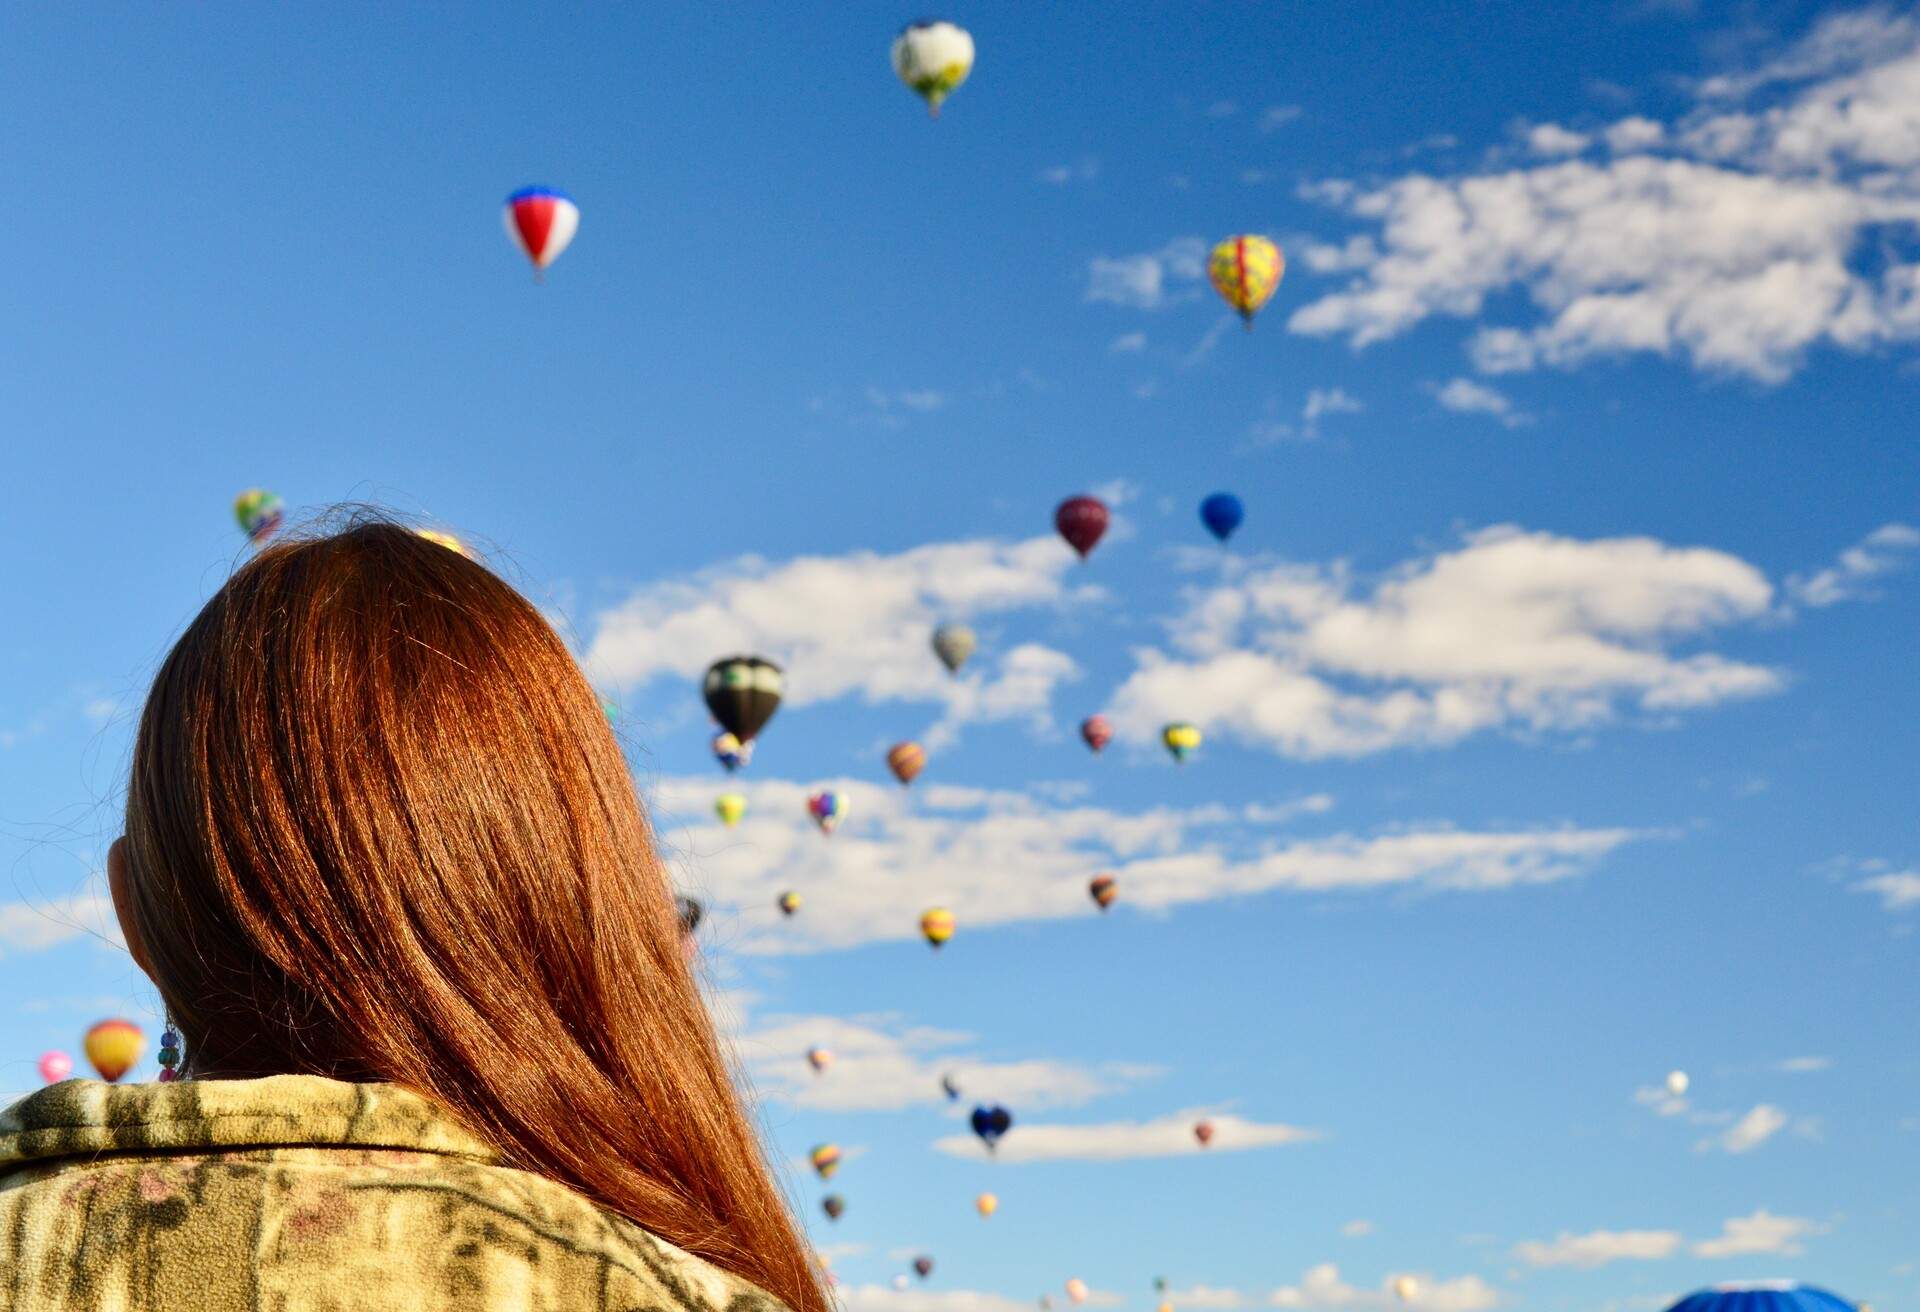 An individual looks at the colourful floating hot air balloons in the cloudy blue sky.